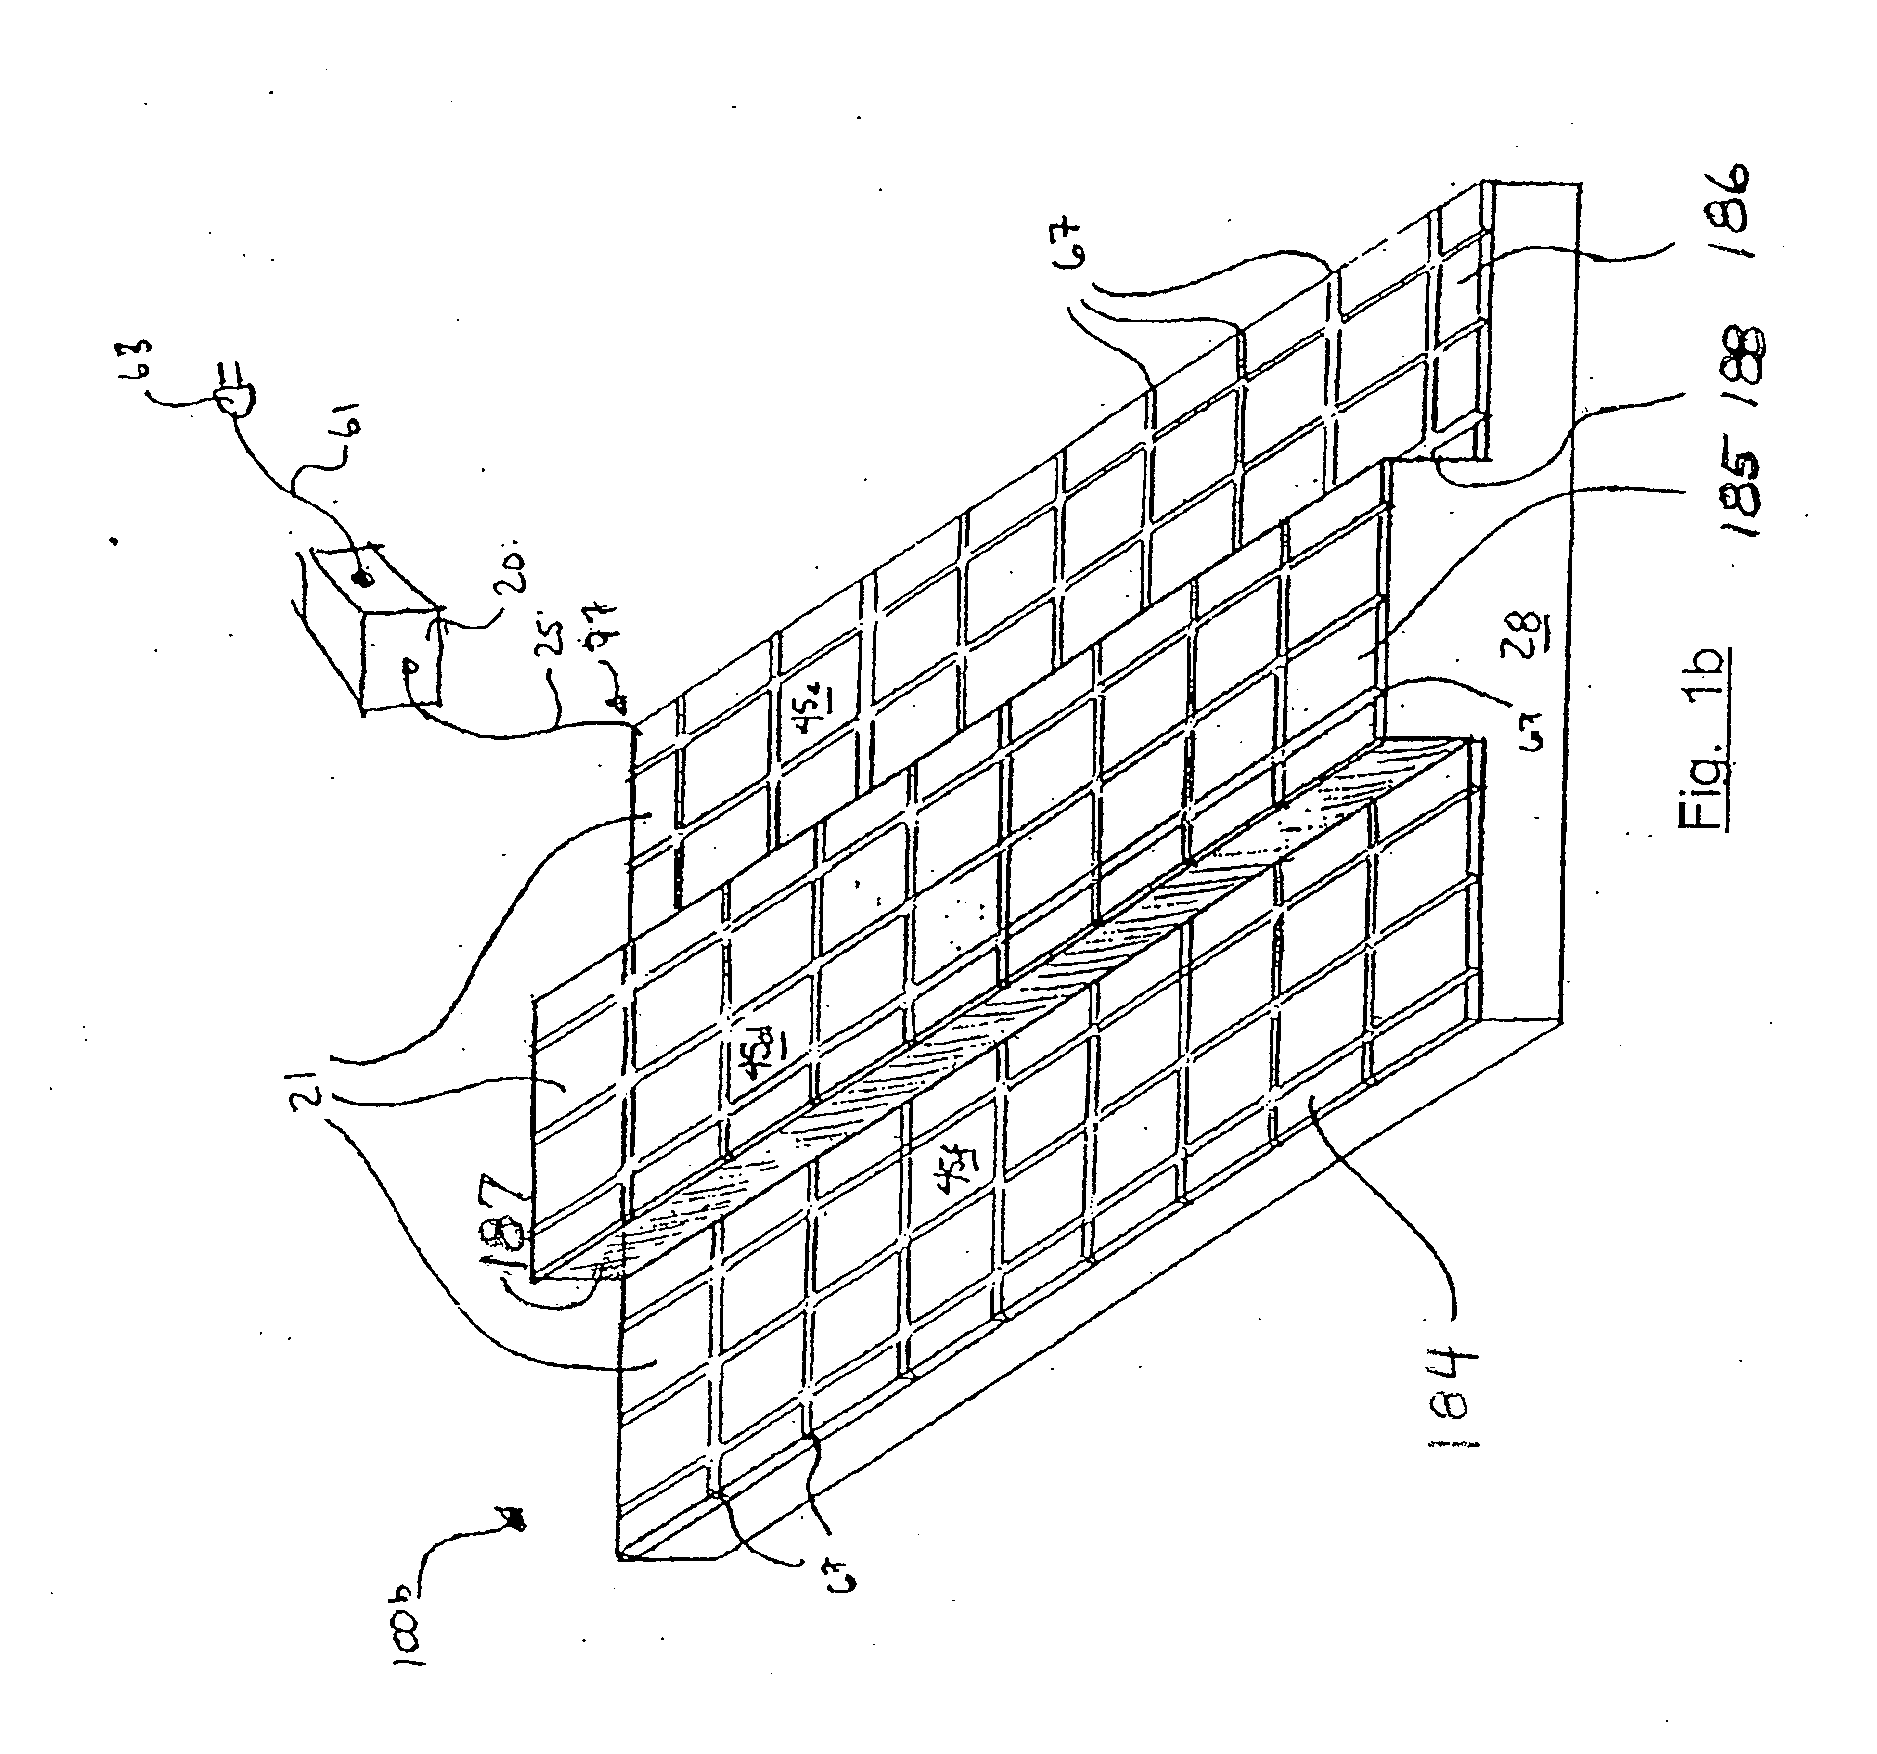 Systems and methods for providing electric power to mobile and arbitrarily positioned devices